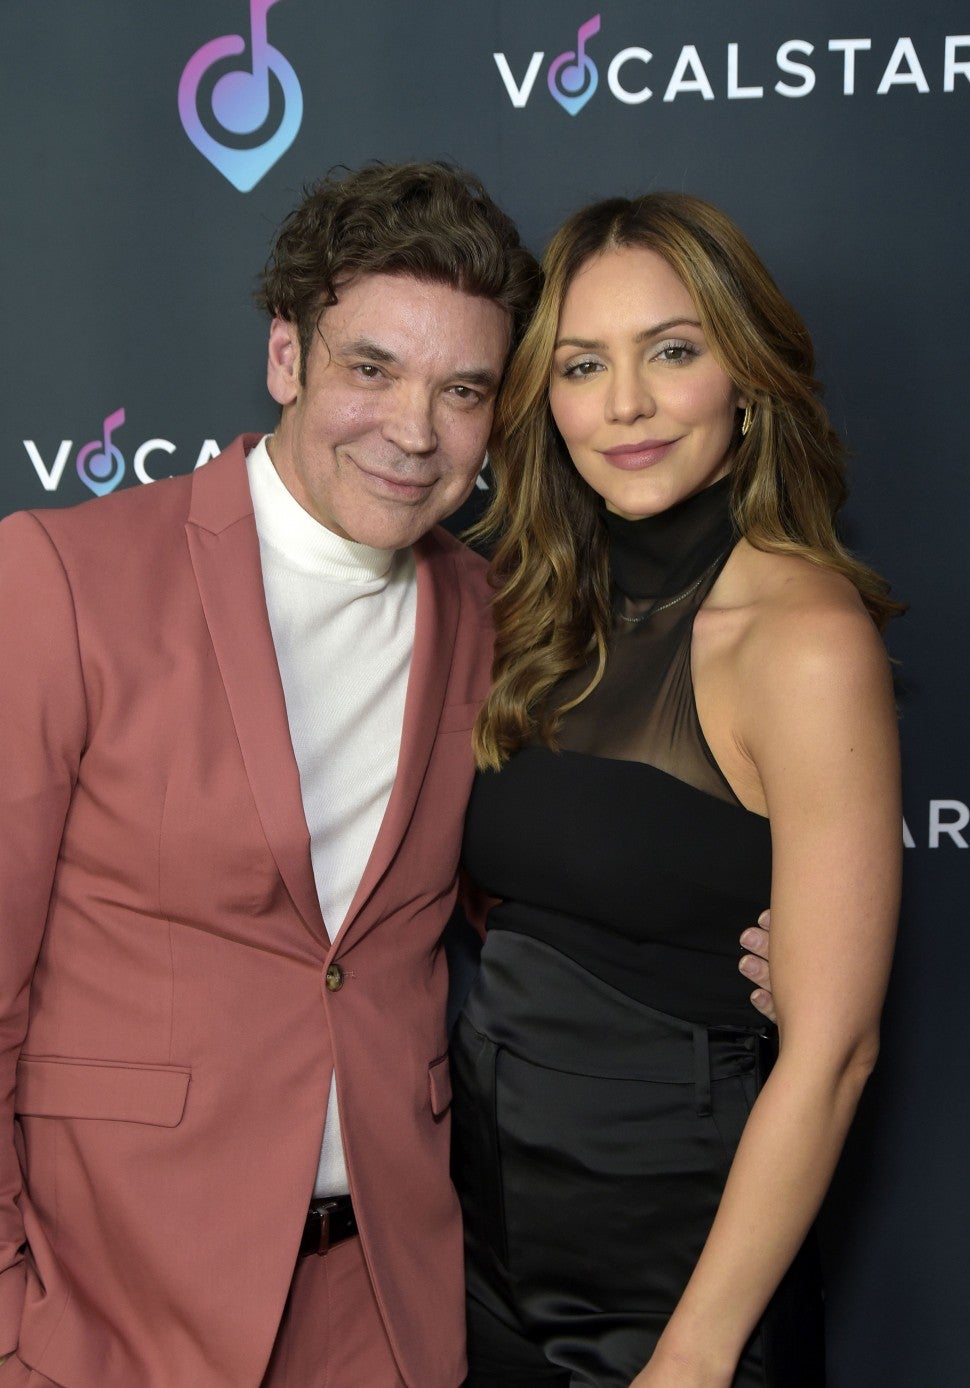 George Caceres and Katharine McPhee at Vocal Star